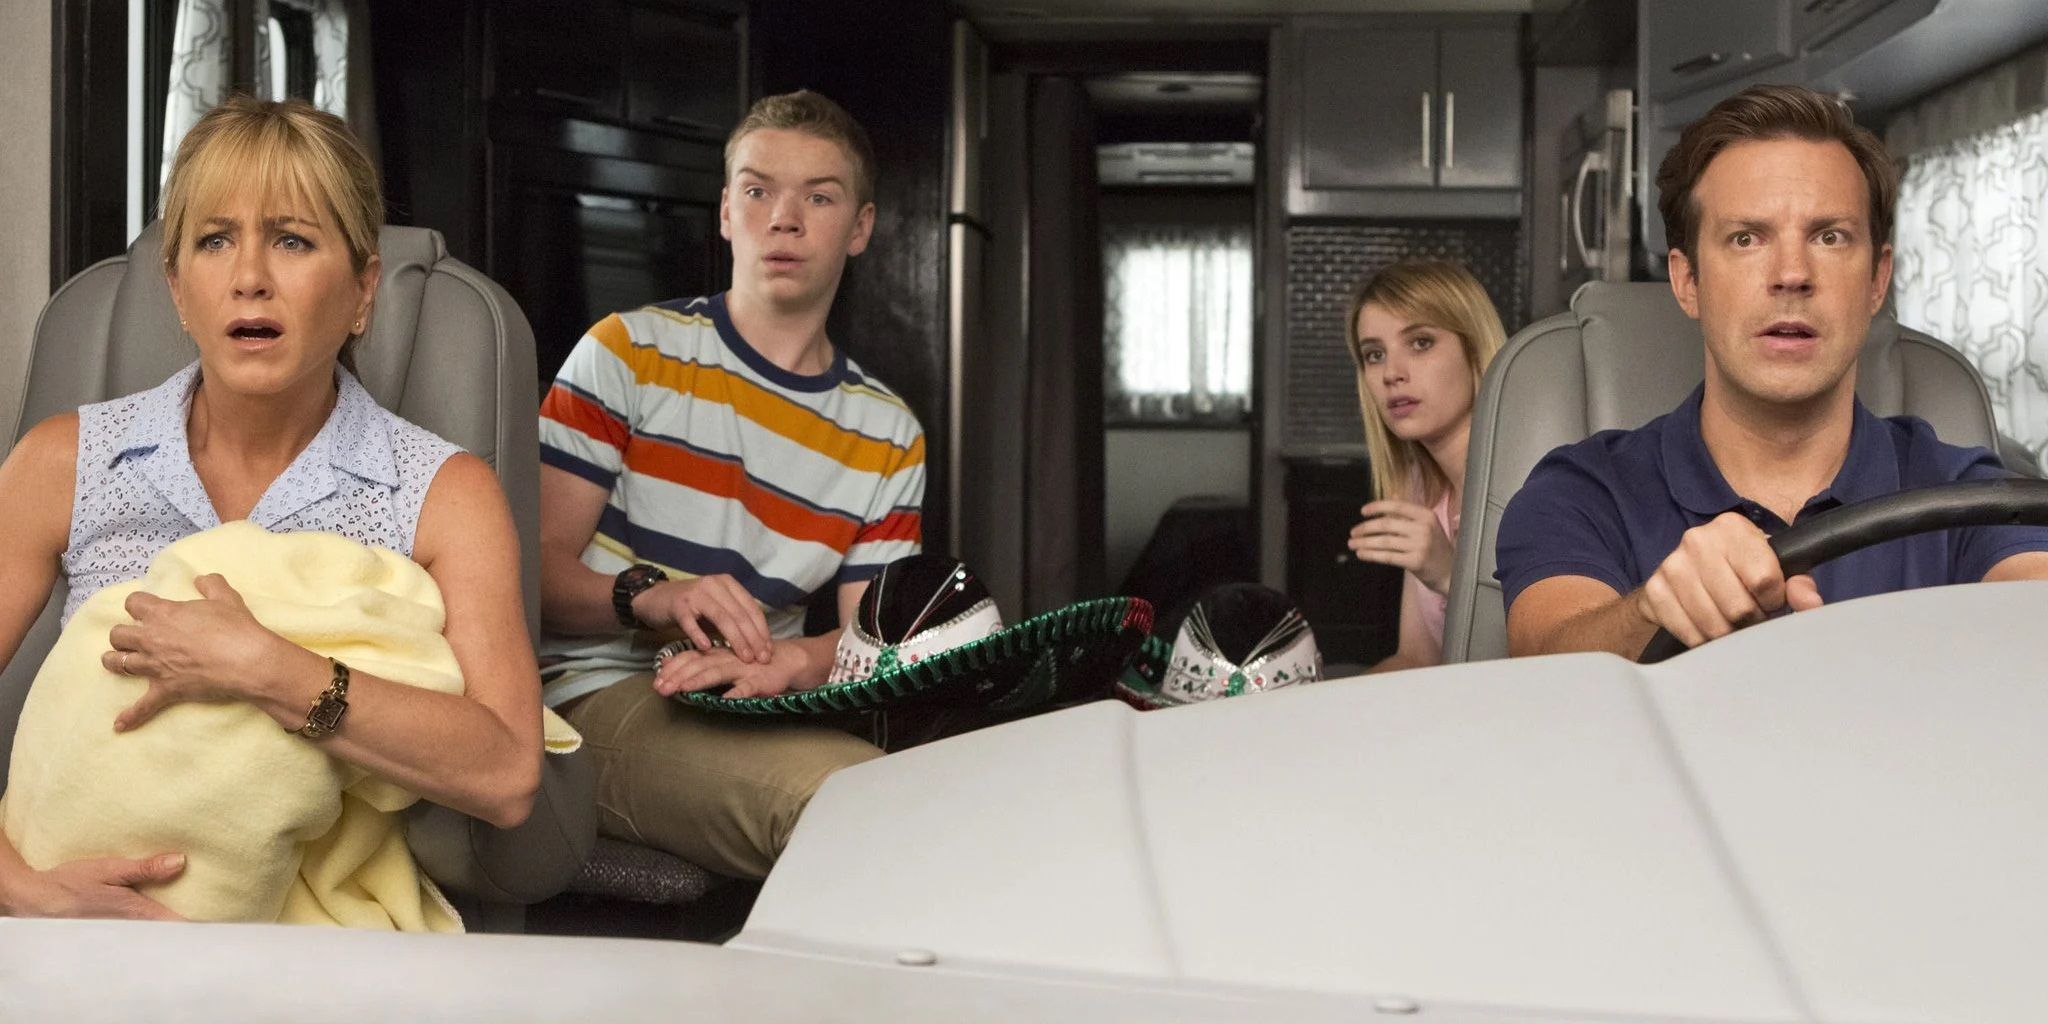 The main cast of We're the Millers in the RV